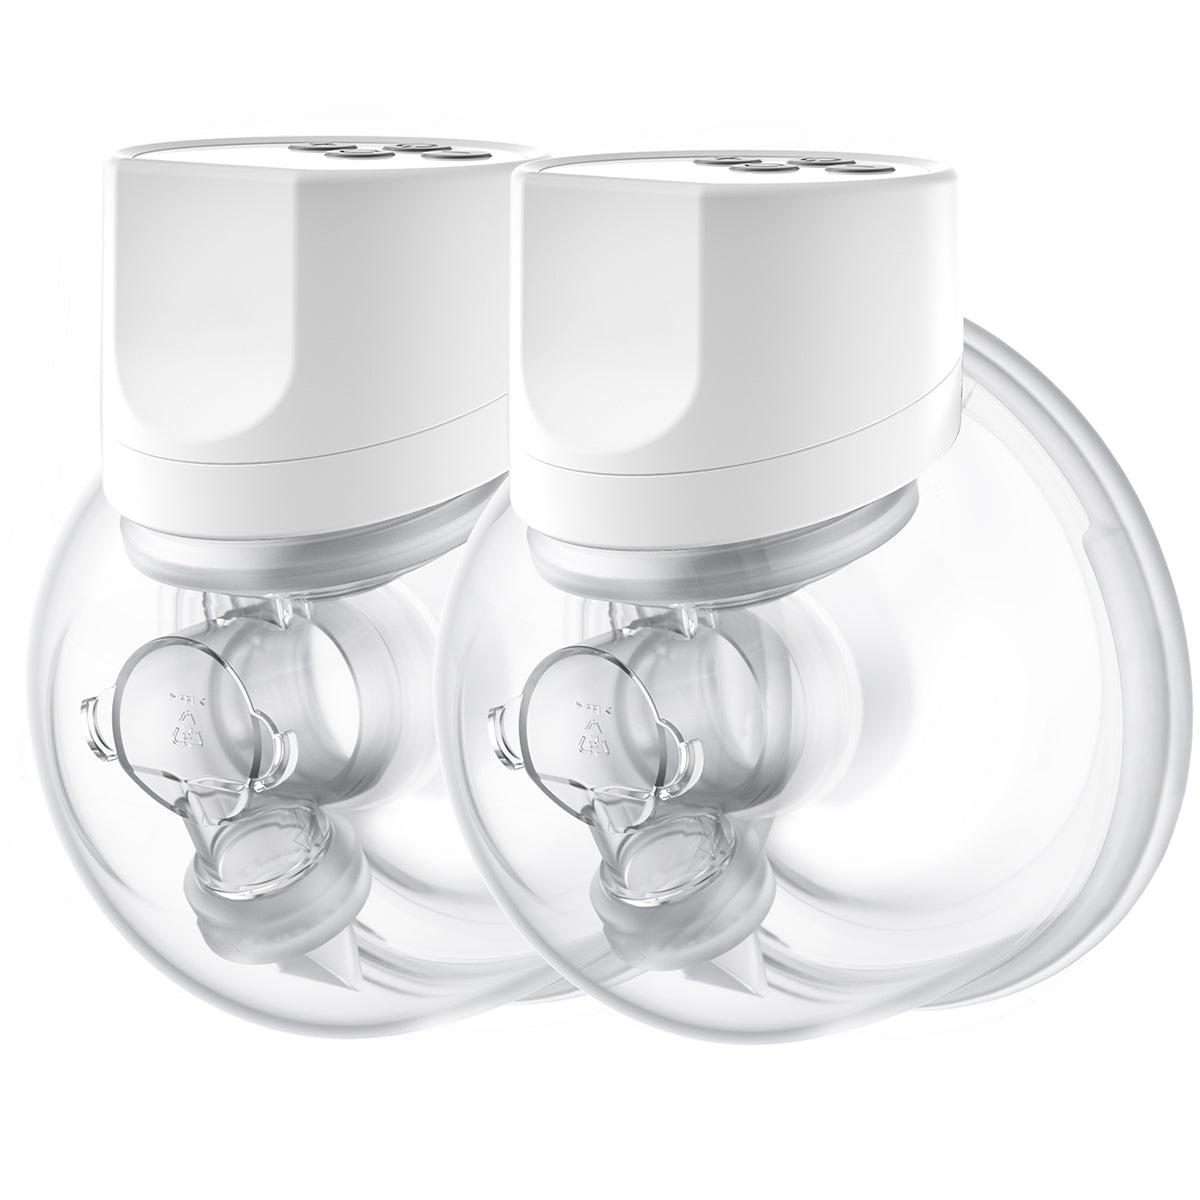 Wearable Breast Pump S12 Pro, Comfortable for Easy Pumping, 2 Pack